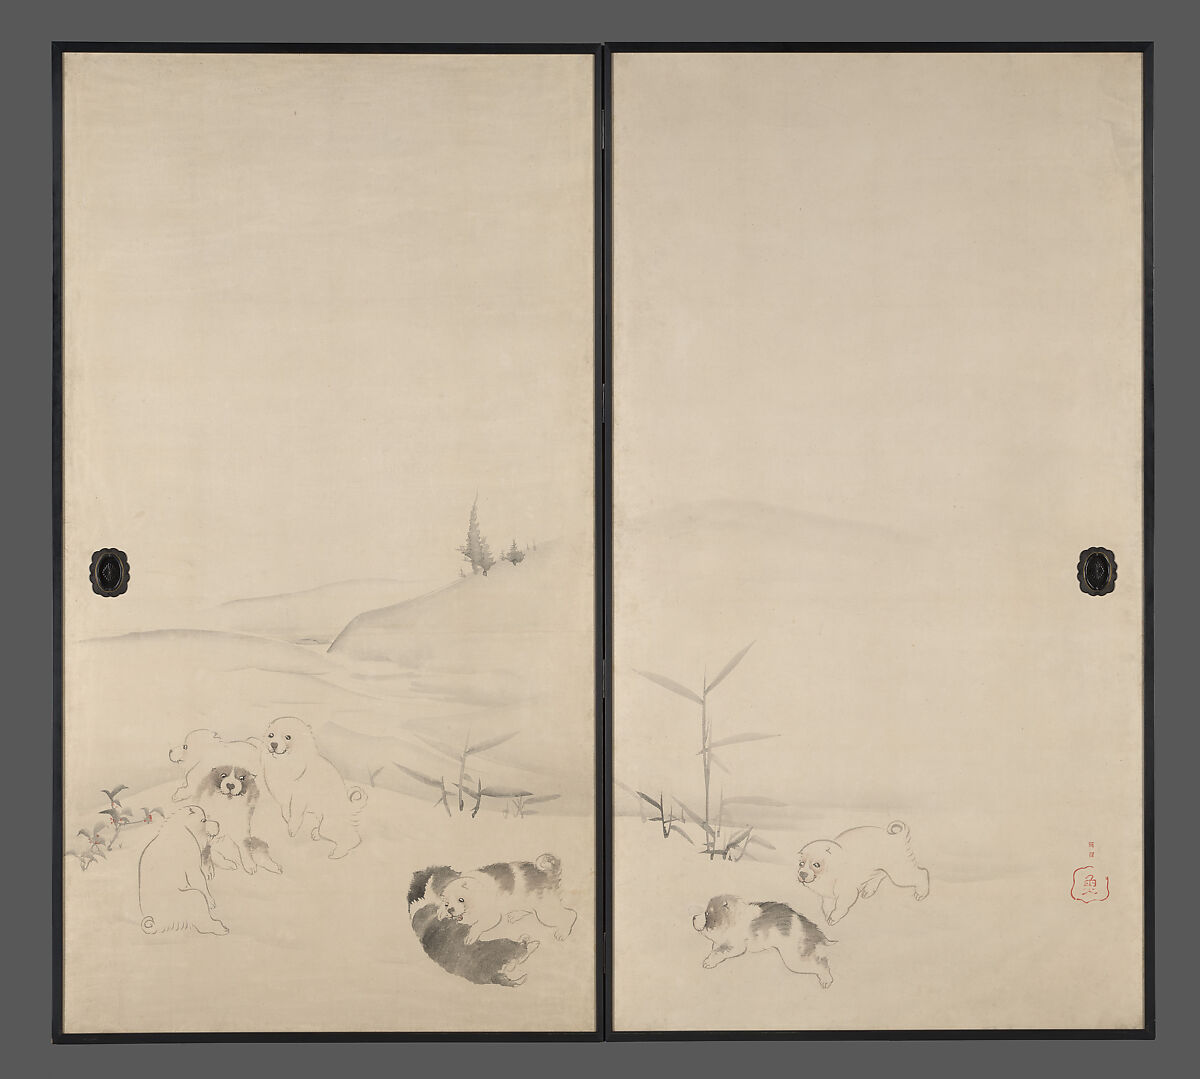 Puppies in the Snow, Nagasawa Rosetsu 長澤蘆雪 (Japanese, 1754–1799), Set of four sliding panels mounted as a pair of two-panel screens; ink and color on paper, Japan 